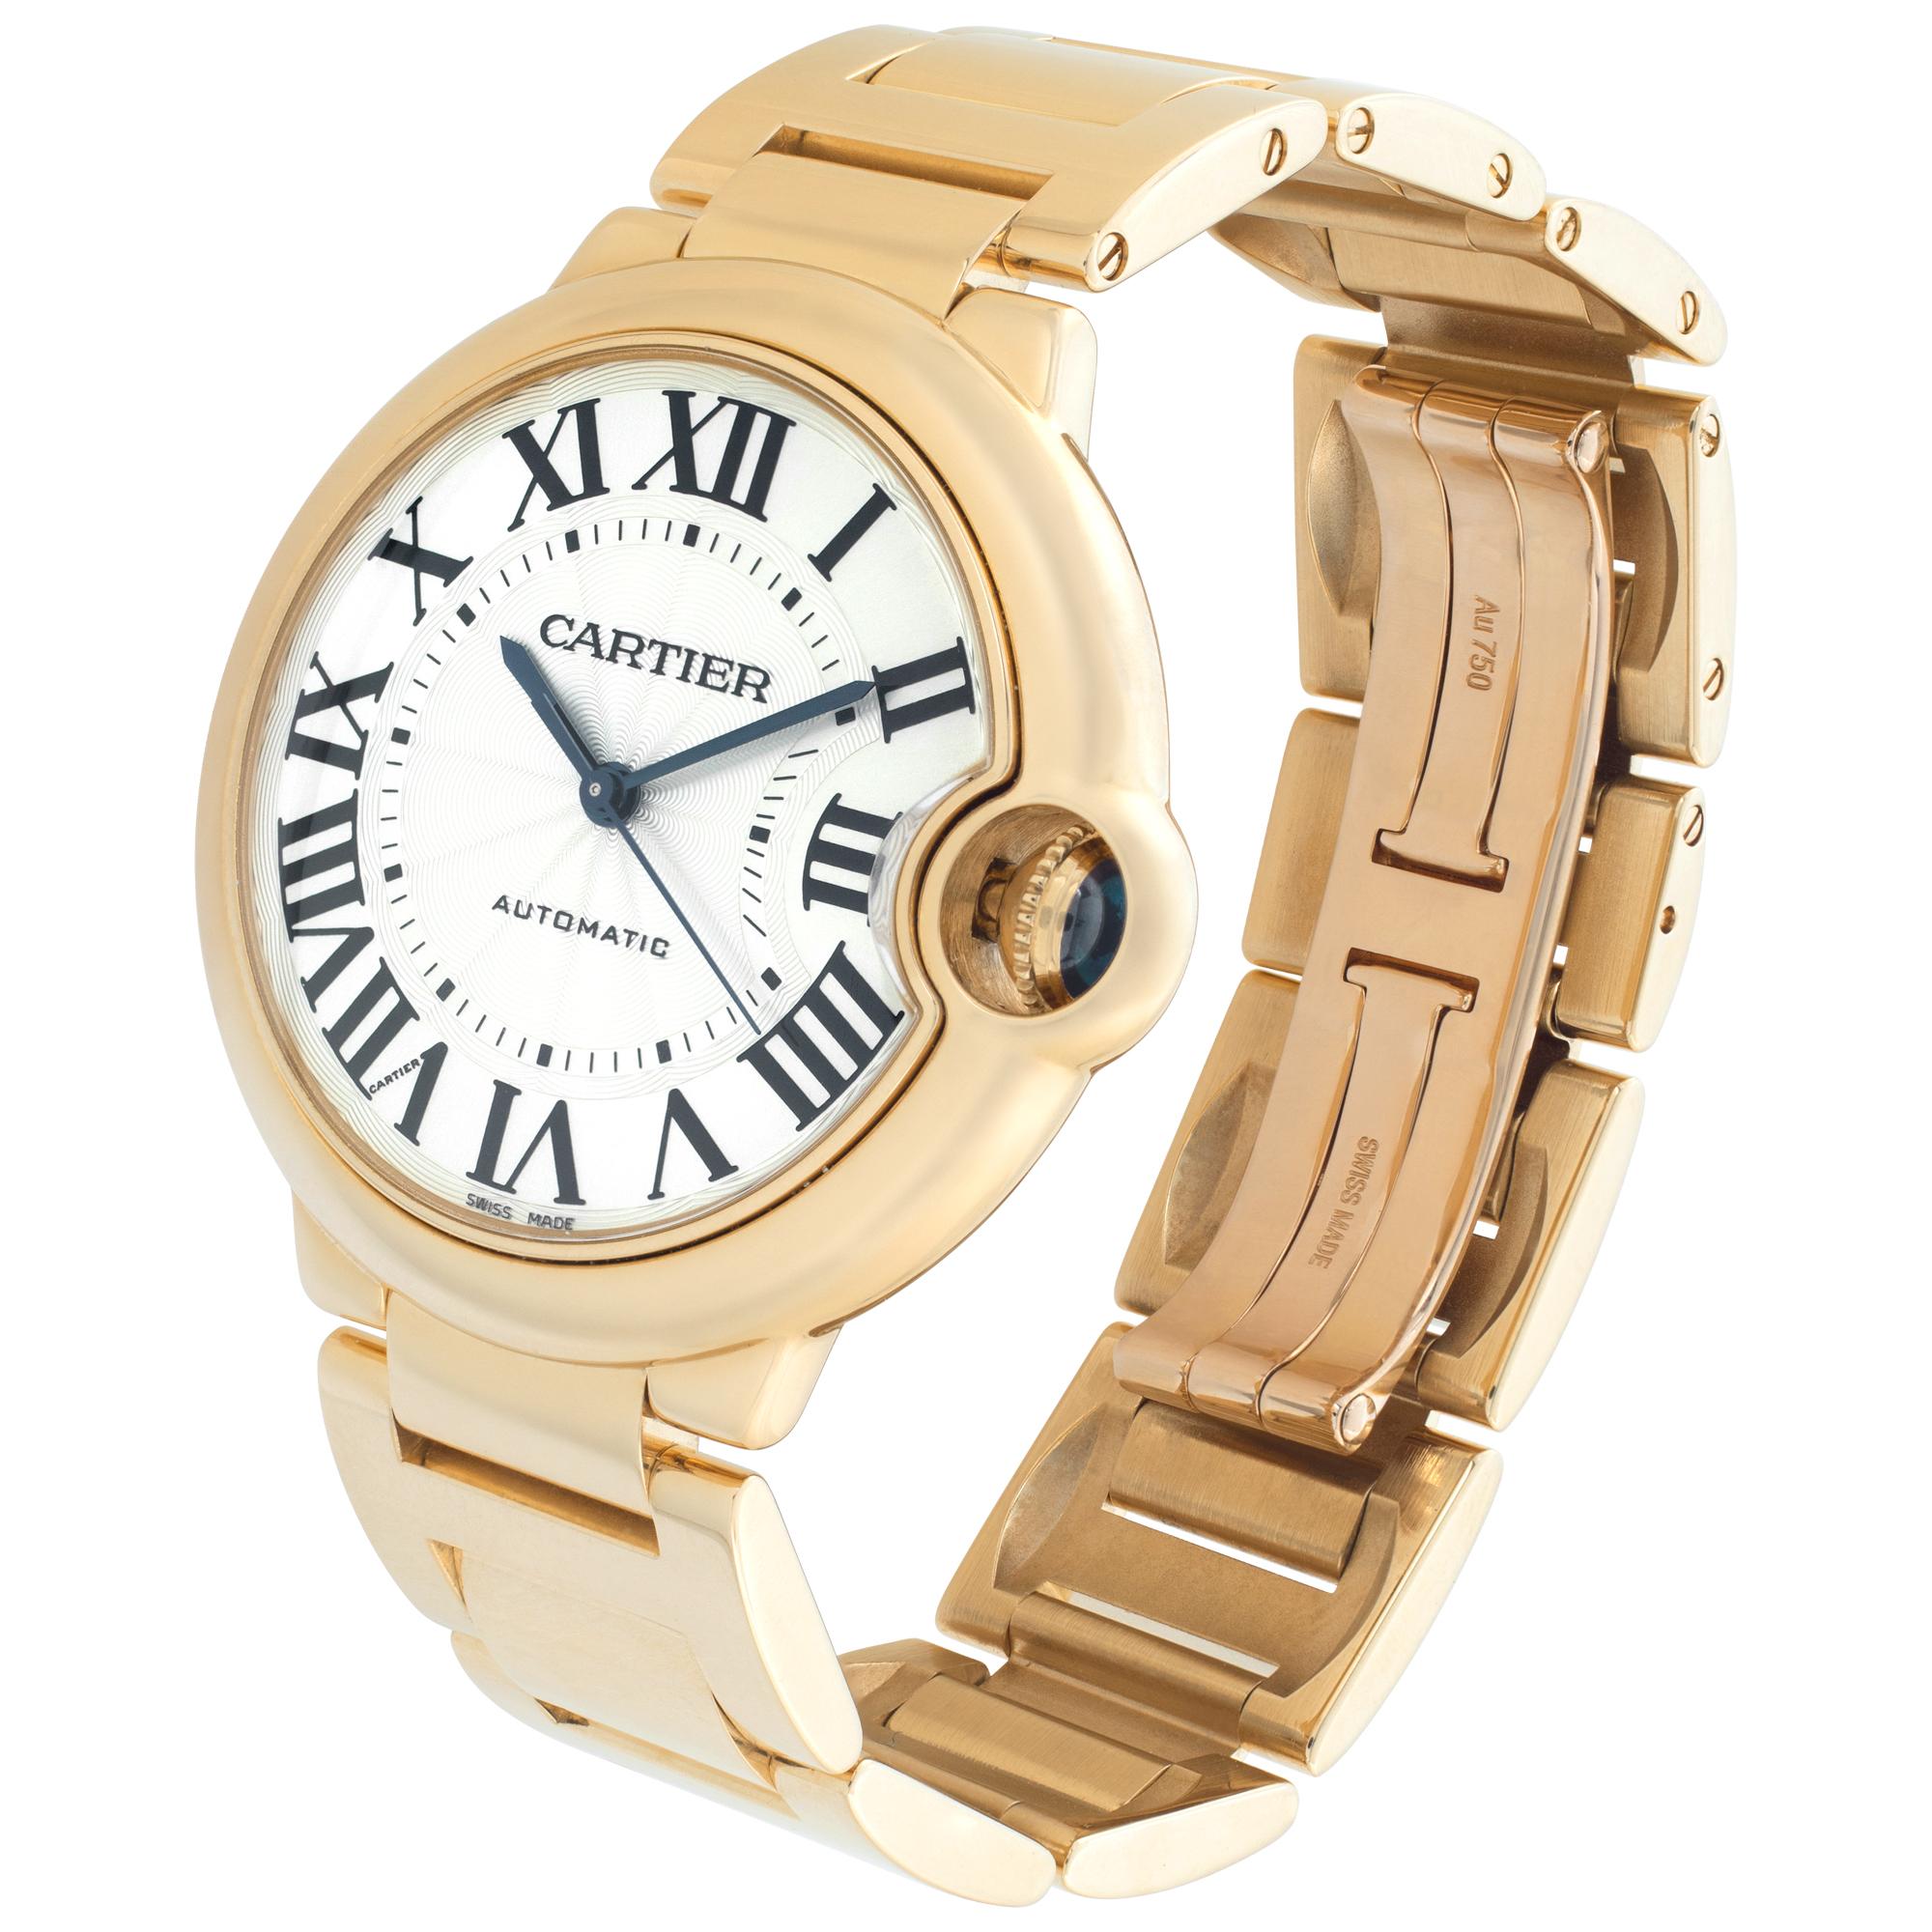 Cartier Ballon Bleu in 18k yellow gold. Auto w/sweep seconds. 36 mm case size. Box and papers. Ref WGBB0046 Circa 2018. Fine Pre-owned Cartier Watch. Certified preowned Sport Cartier Ballon Bleu WGBB0046 watch is made out of yellow gold on a 18k